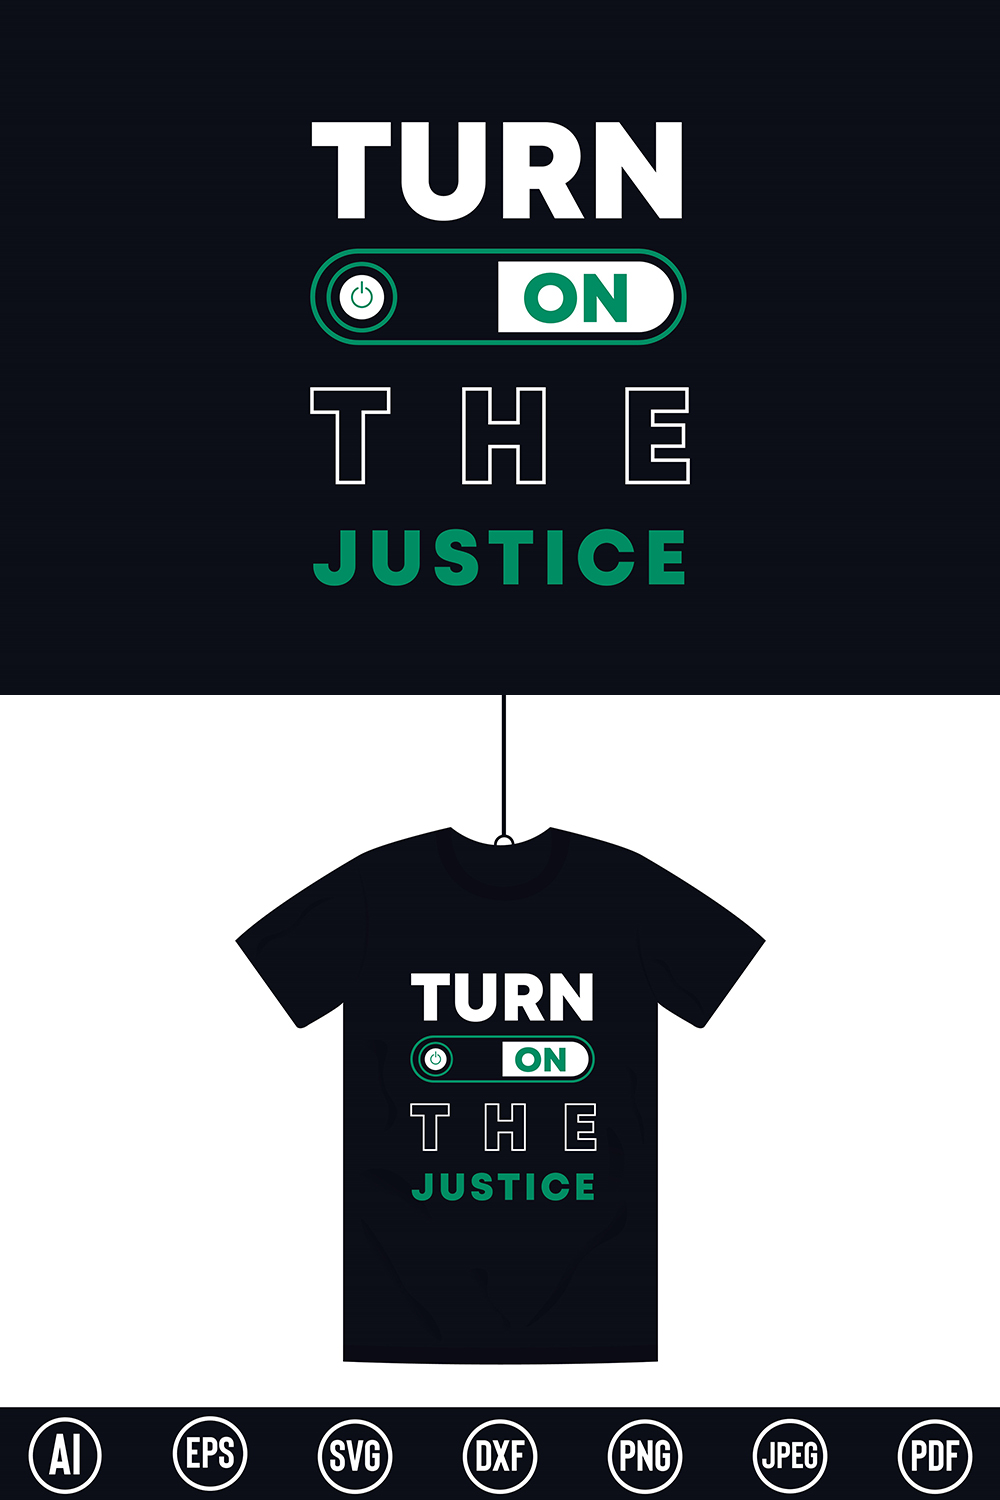 Modern Typography T-Shirt design with “Turn on the justice” quote for t-shirt, posters, stickers, mug prints, banners, gift cards, labels etc pinterest preview image.